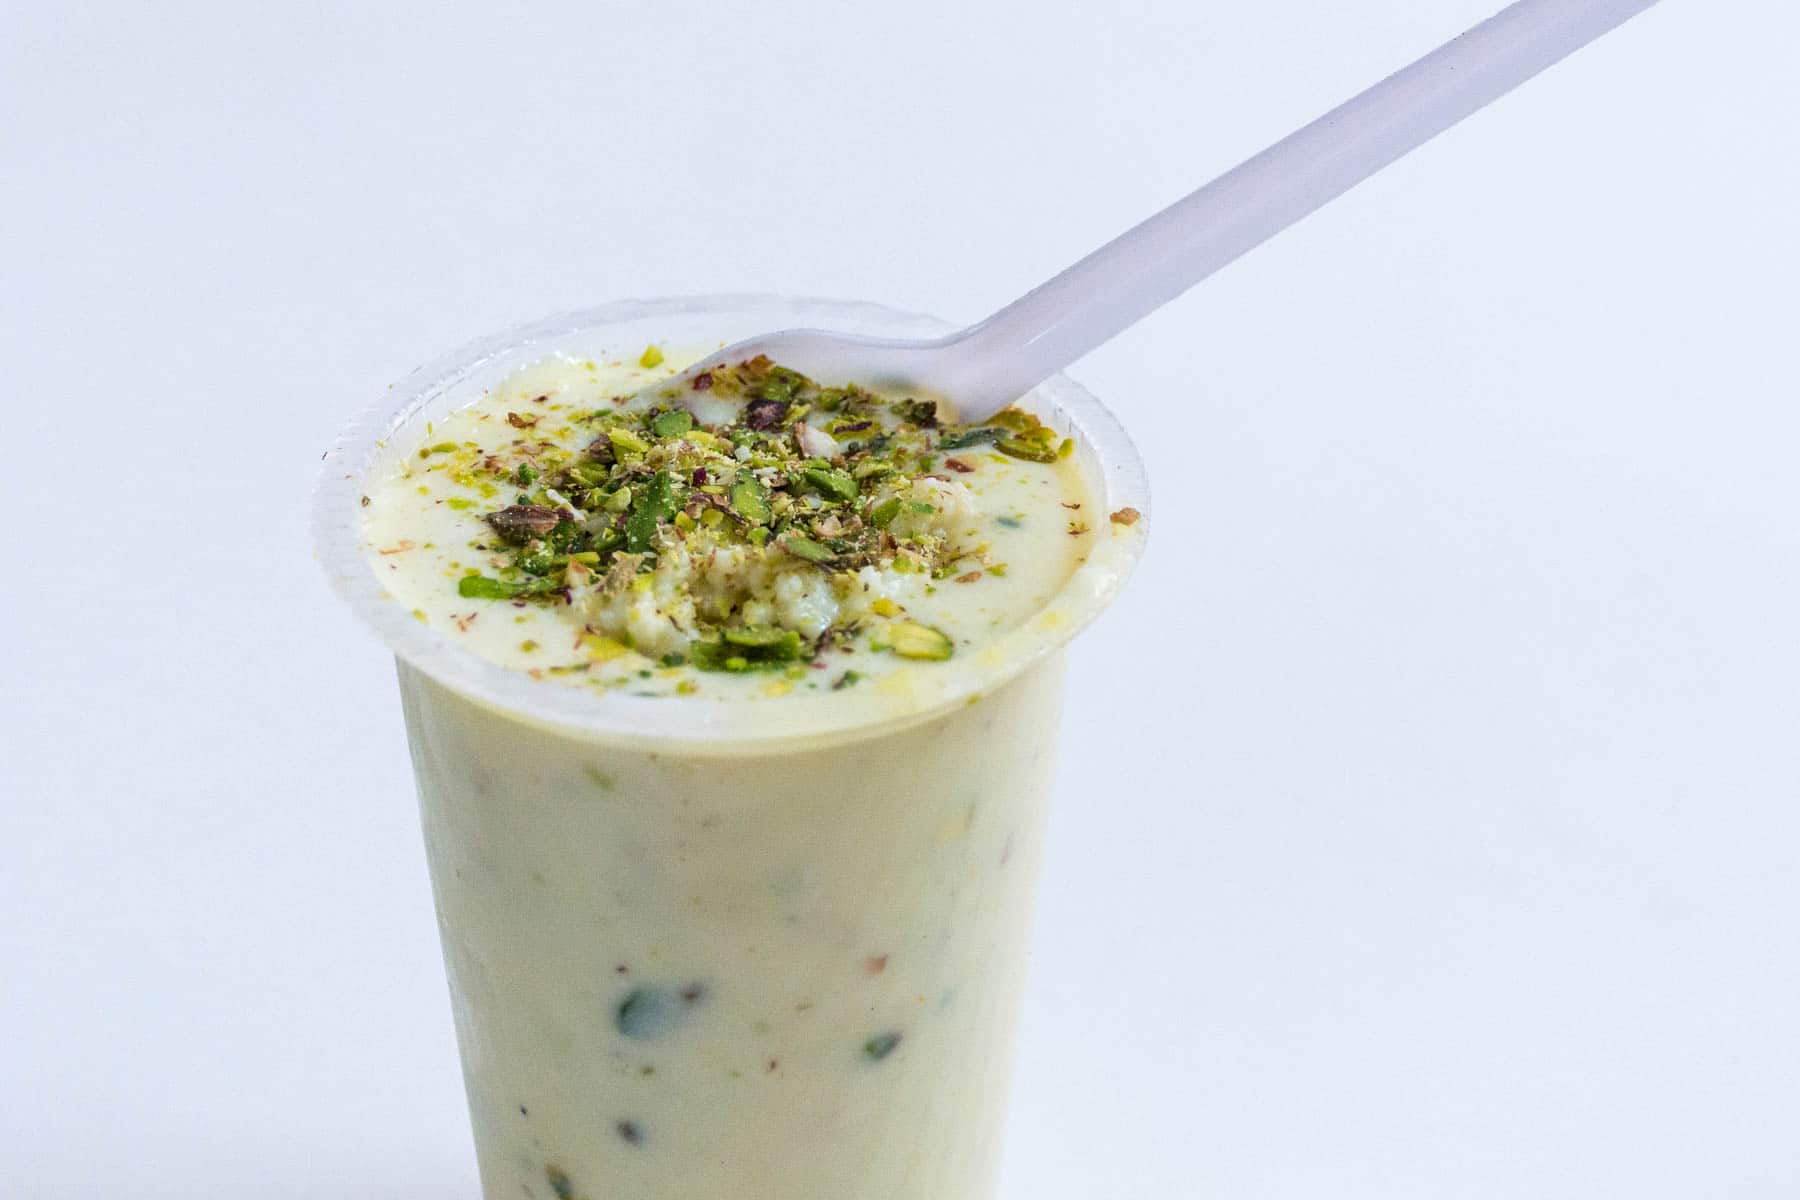 Where and what to eat in Hyderabad's Old City - Kesar pista lassi at Agra sweets - Lost With Purpose